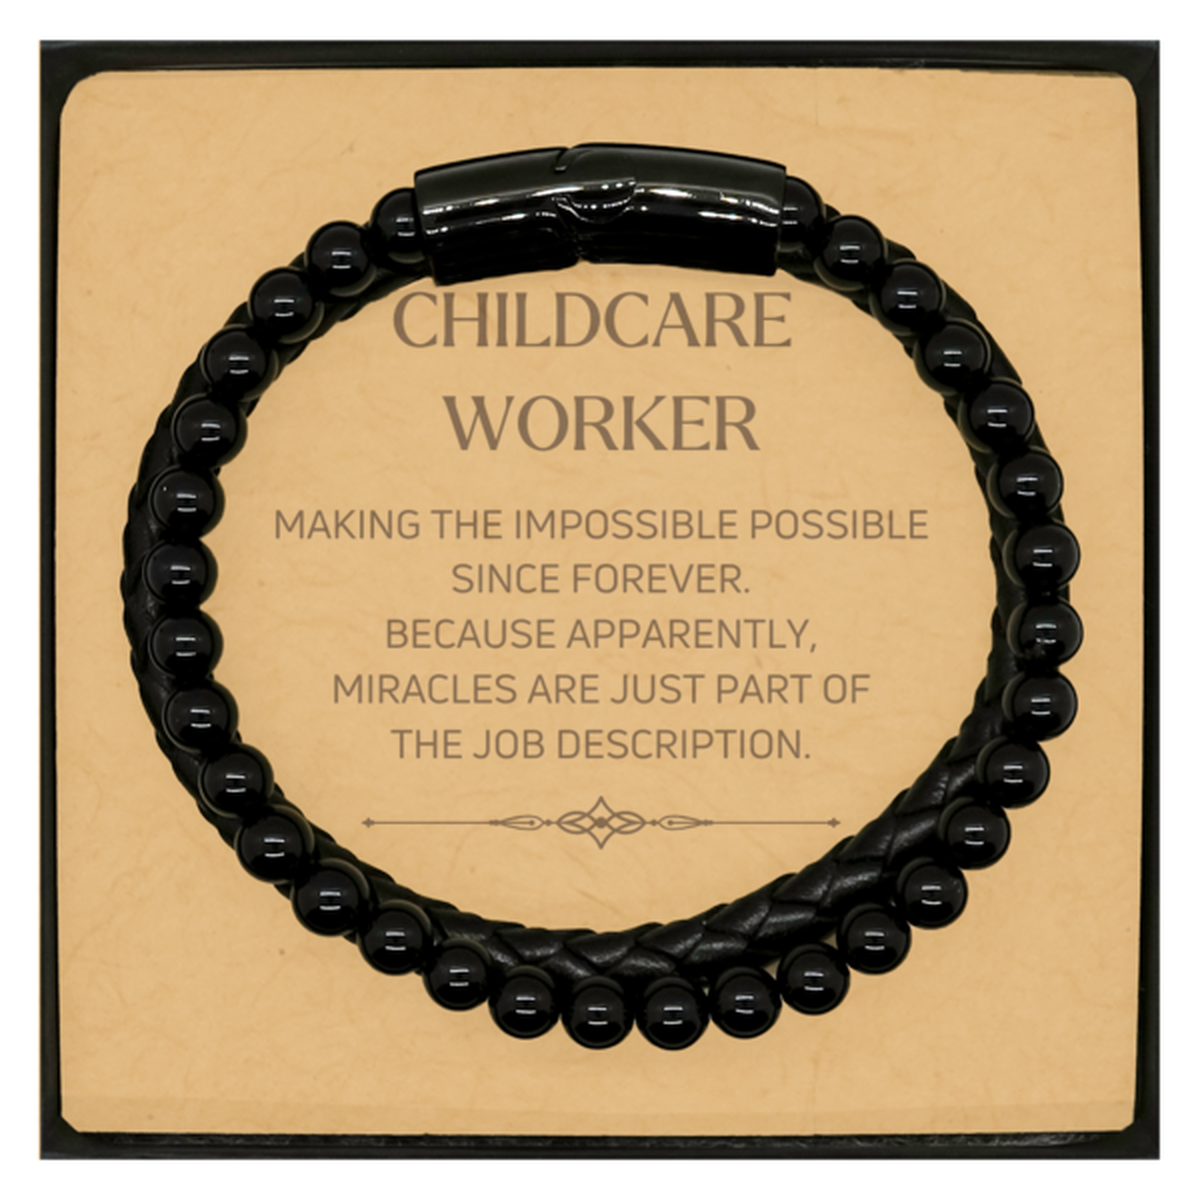 Funny Childcare Worker Gifts, Miracles are just part of the job description, Inspirational Birthday Christmas Stone Leather Bracelets For Childcare Worker, Men, Women, Coworkers, Friends, Boss